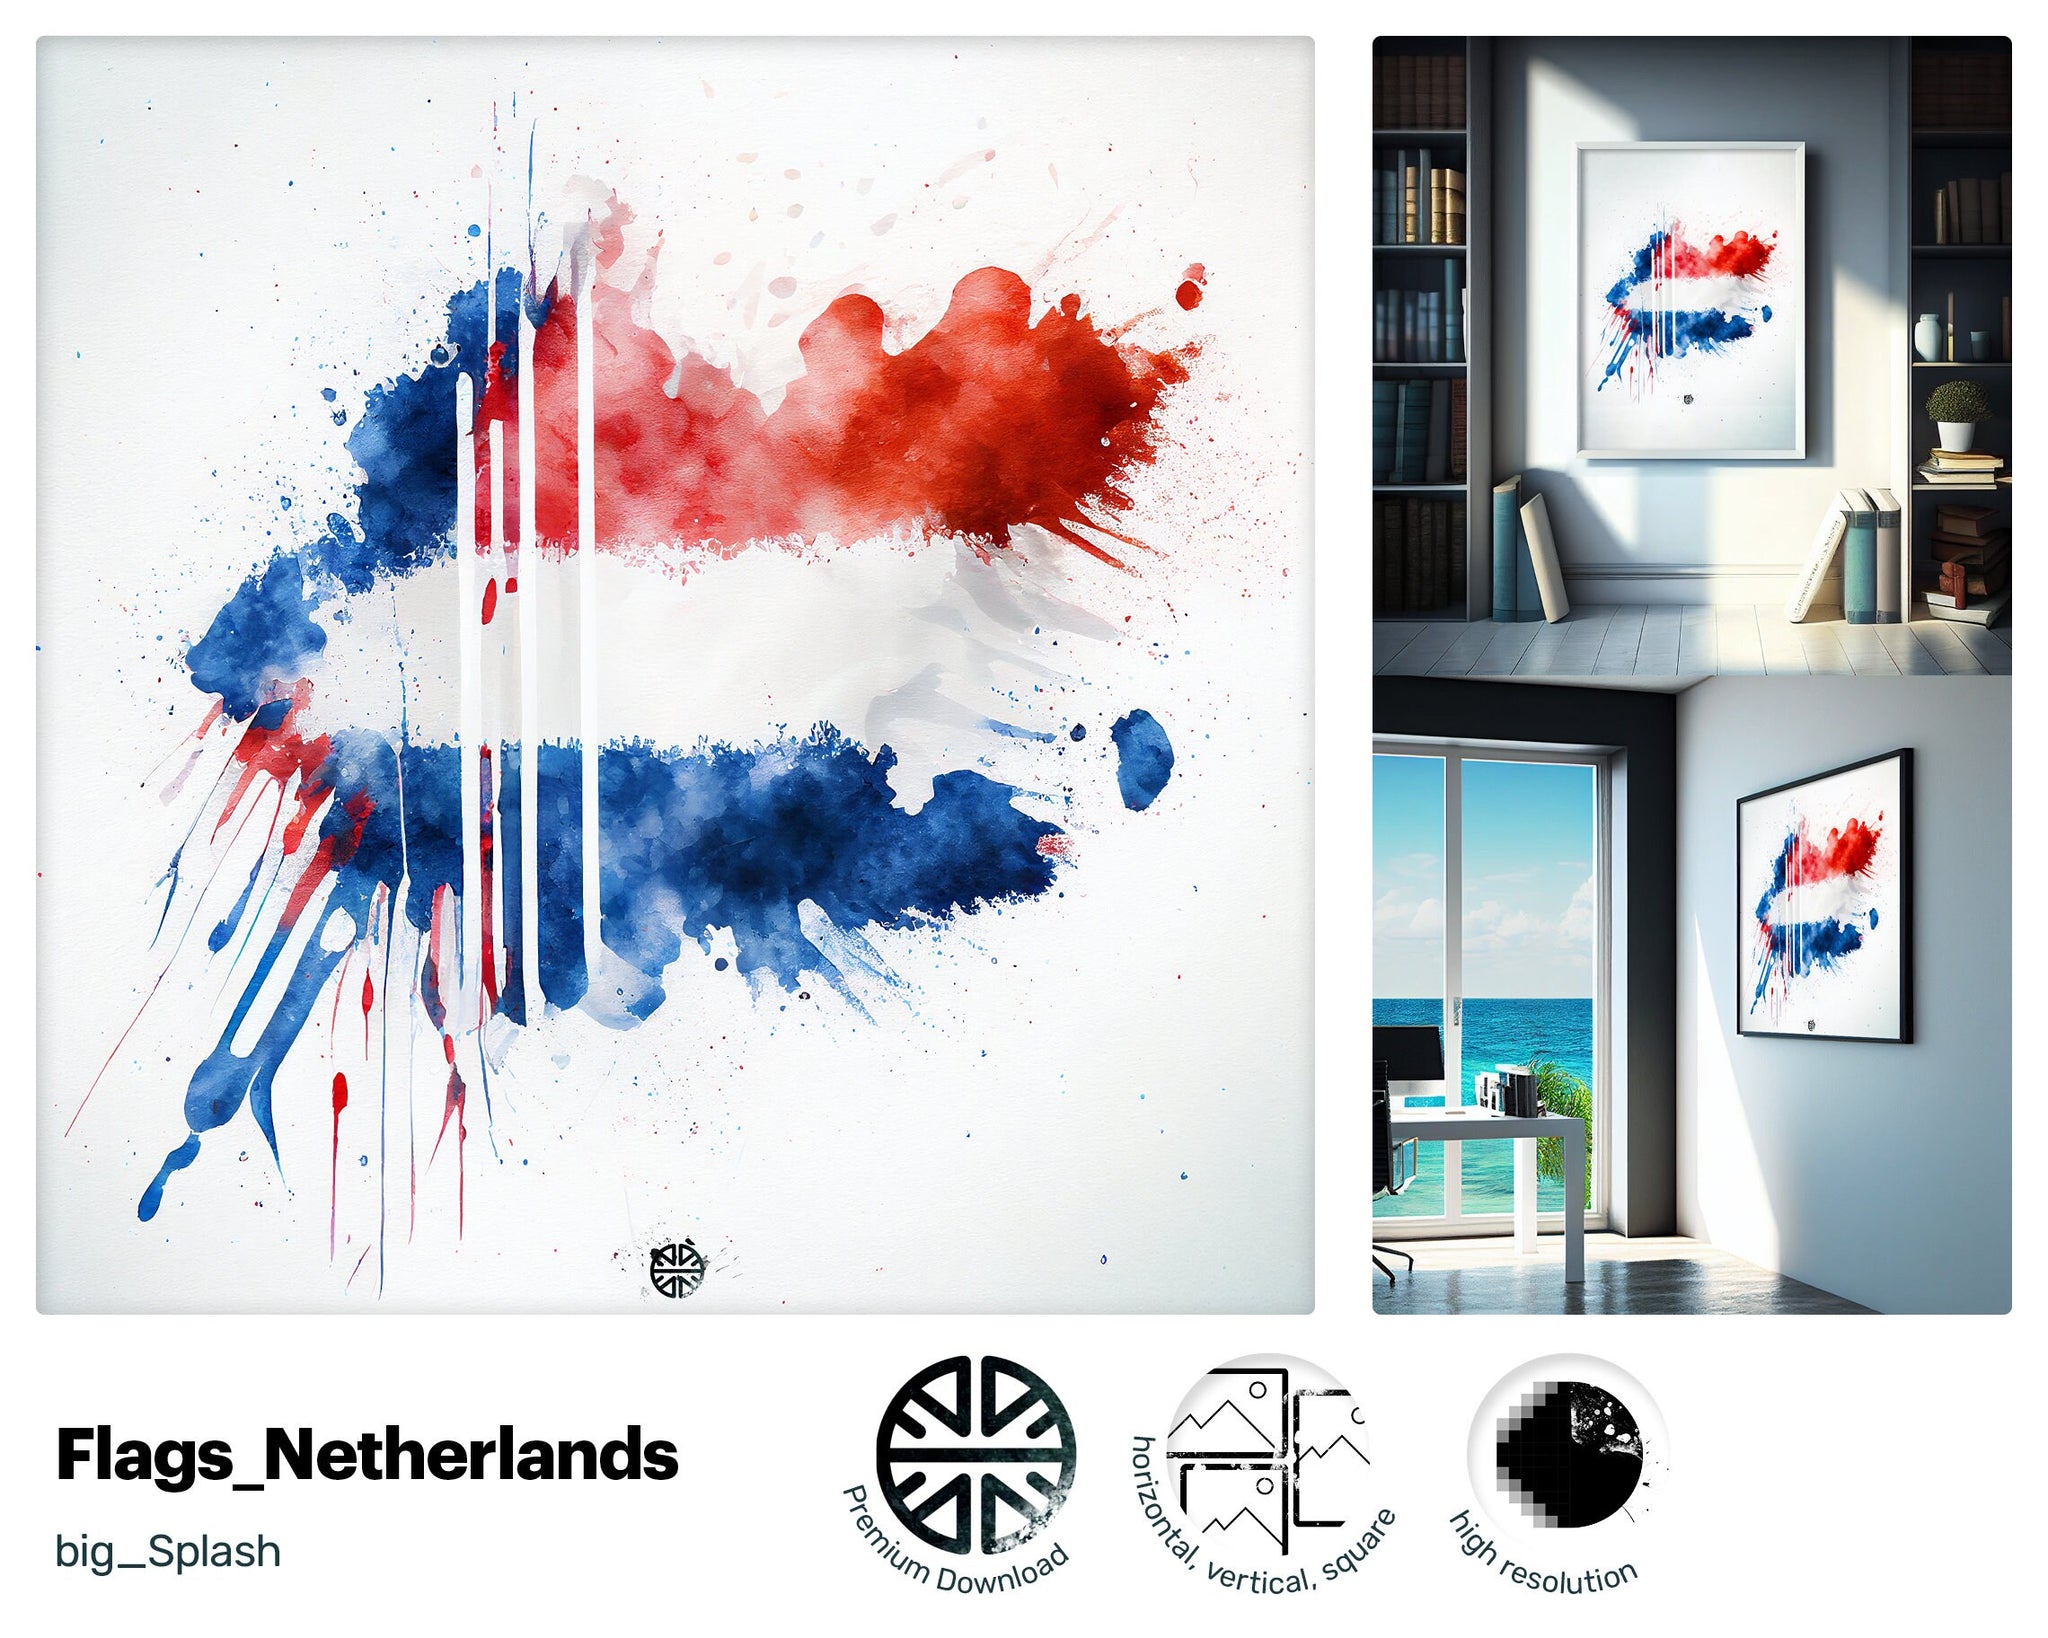 Pointed Lovely Dutch flag, Xclusive Downloadable Prints, Cute Sparkling Happy Radiant Heartwarming Mug Print